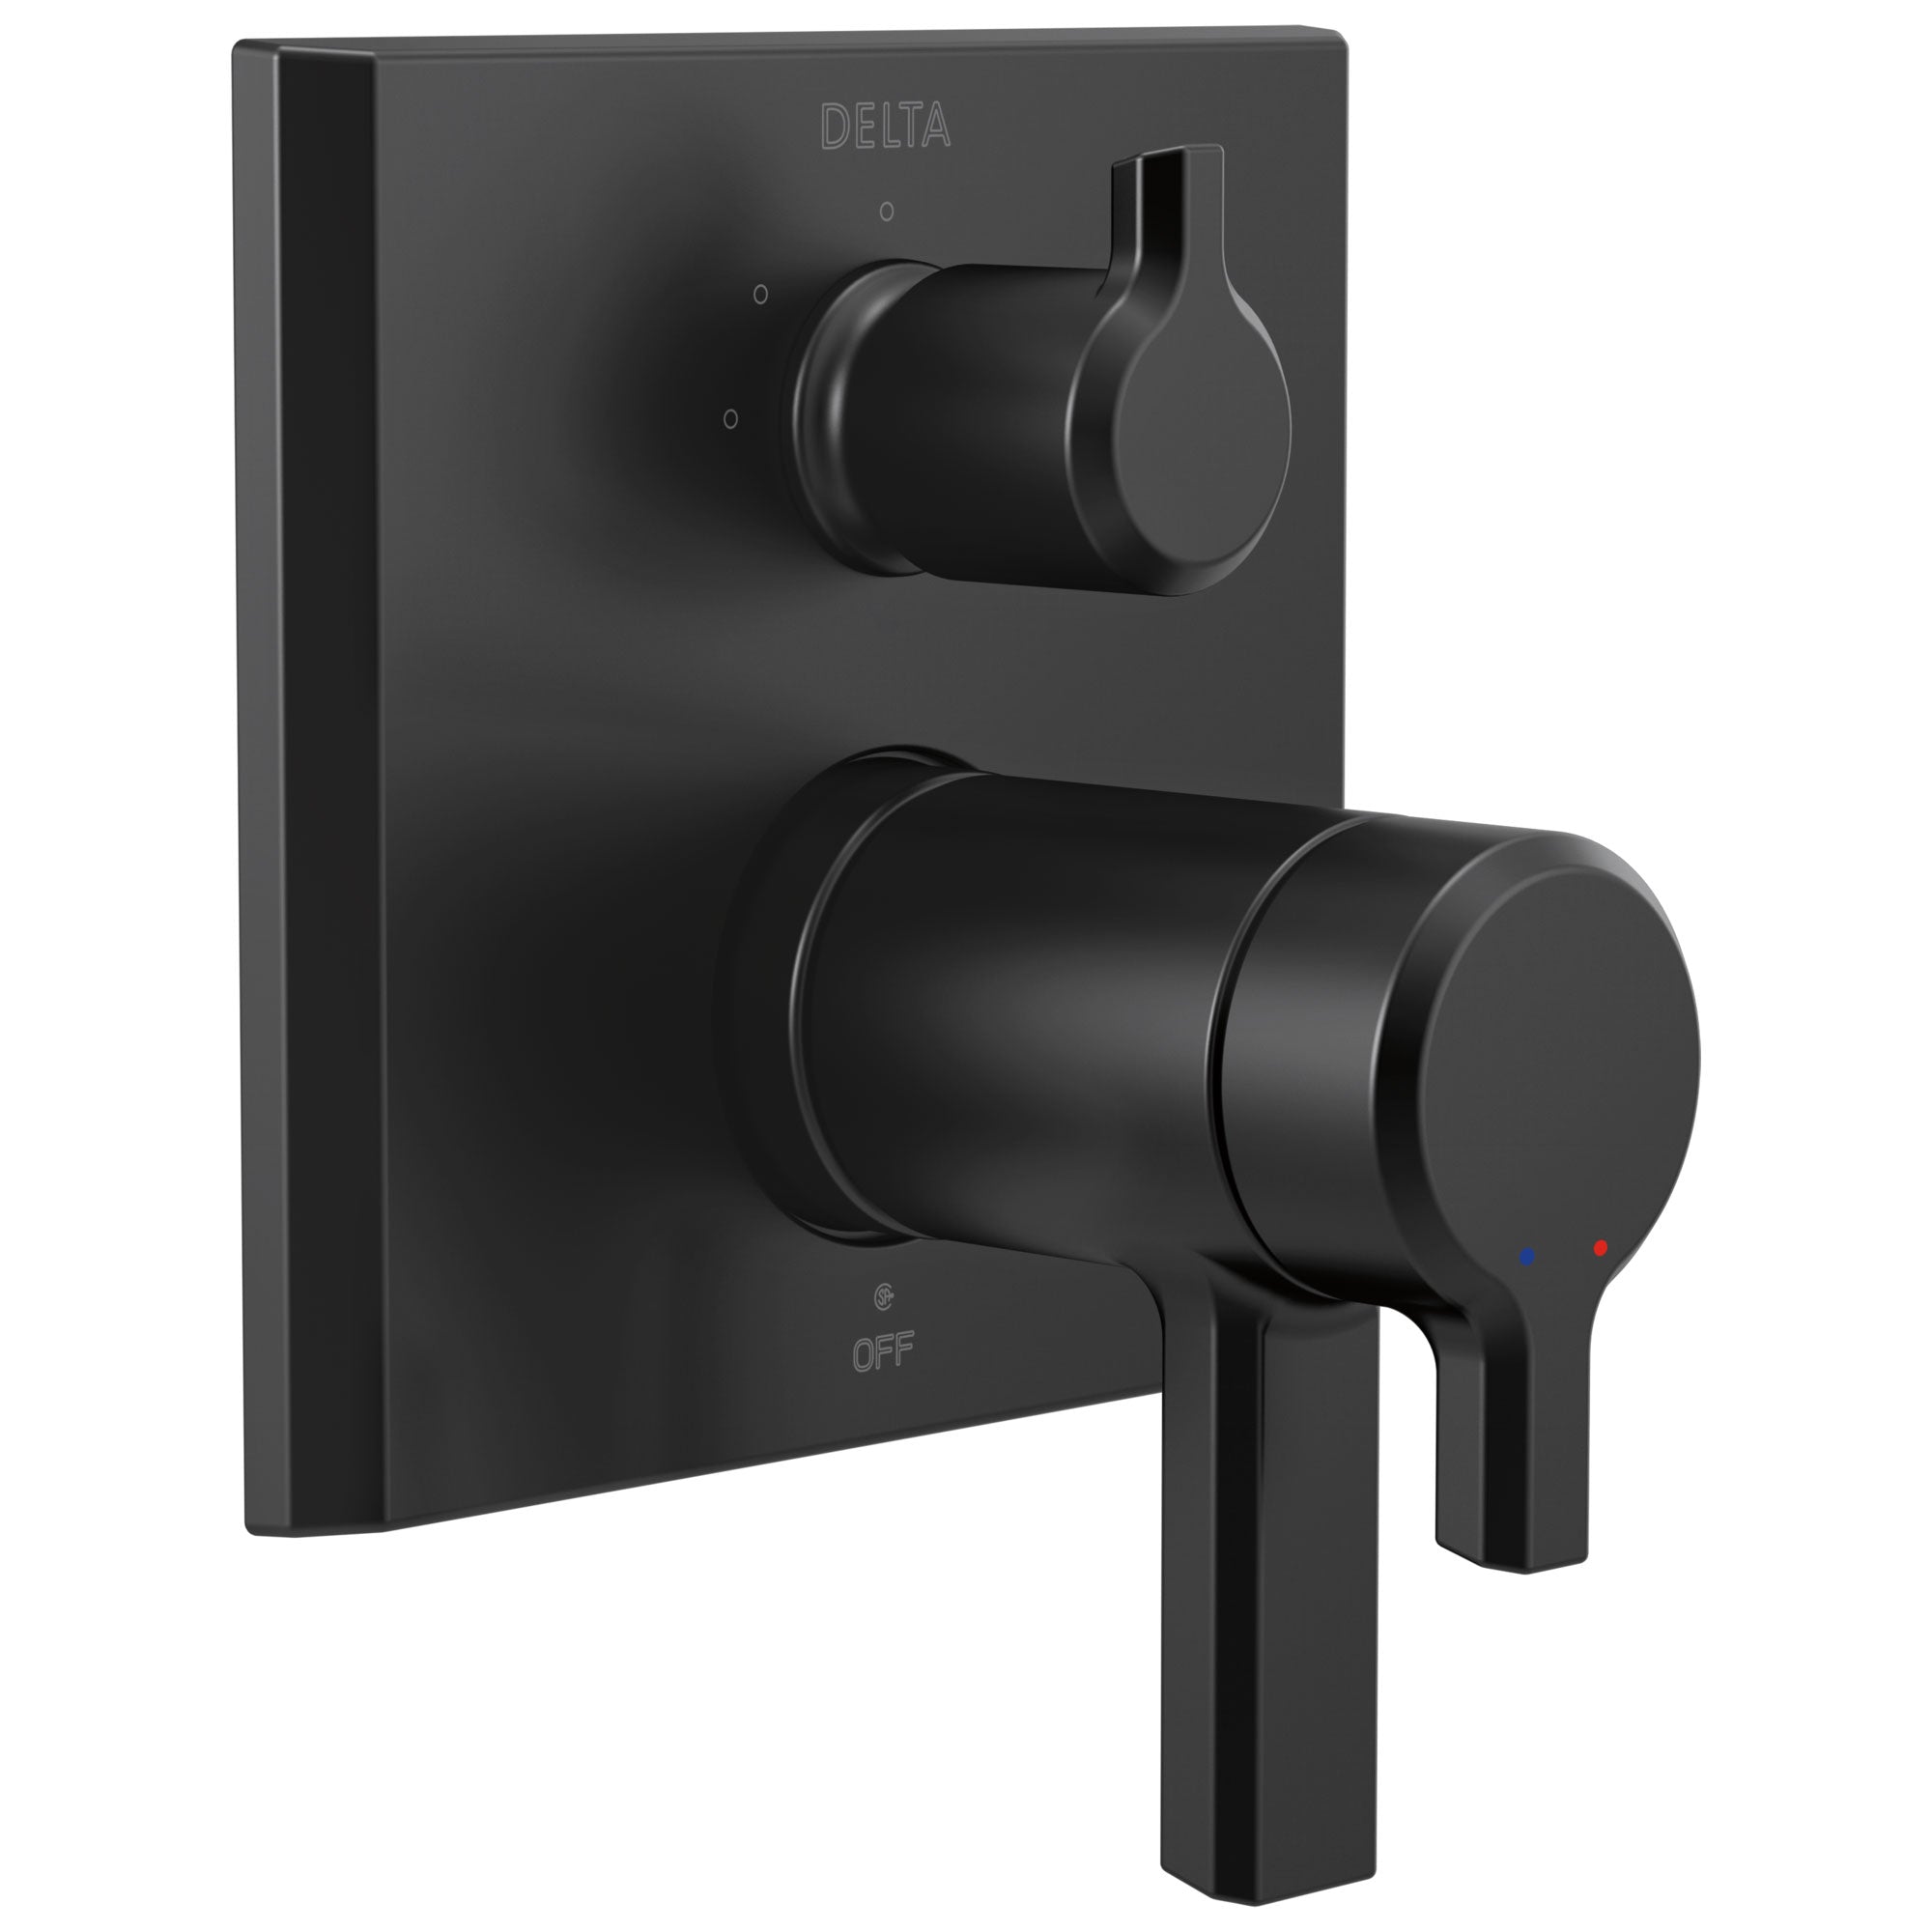 Delta Pivotal Modern Matte Black Finish Thermostatic Shower System Control with 3-Setting Integrated Diverter Includes Valve and Handles D3090V